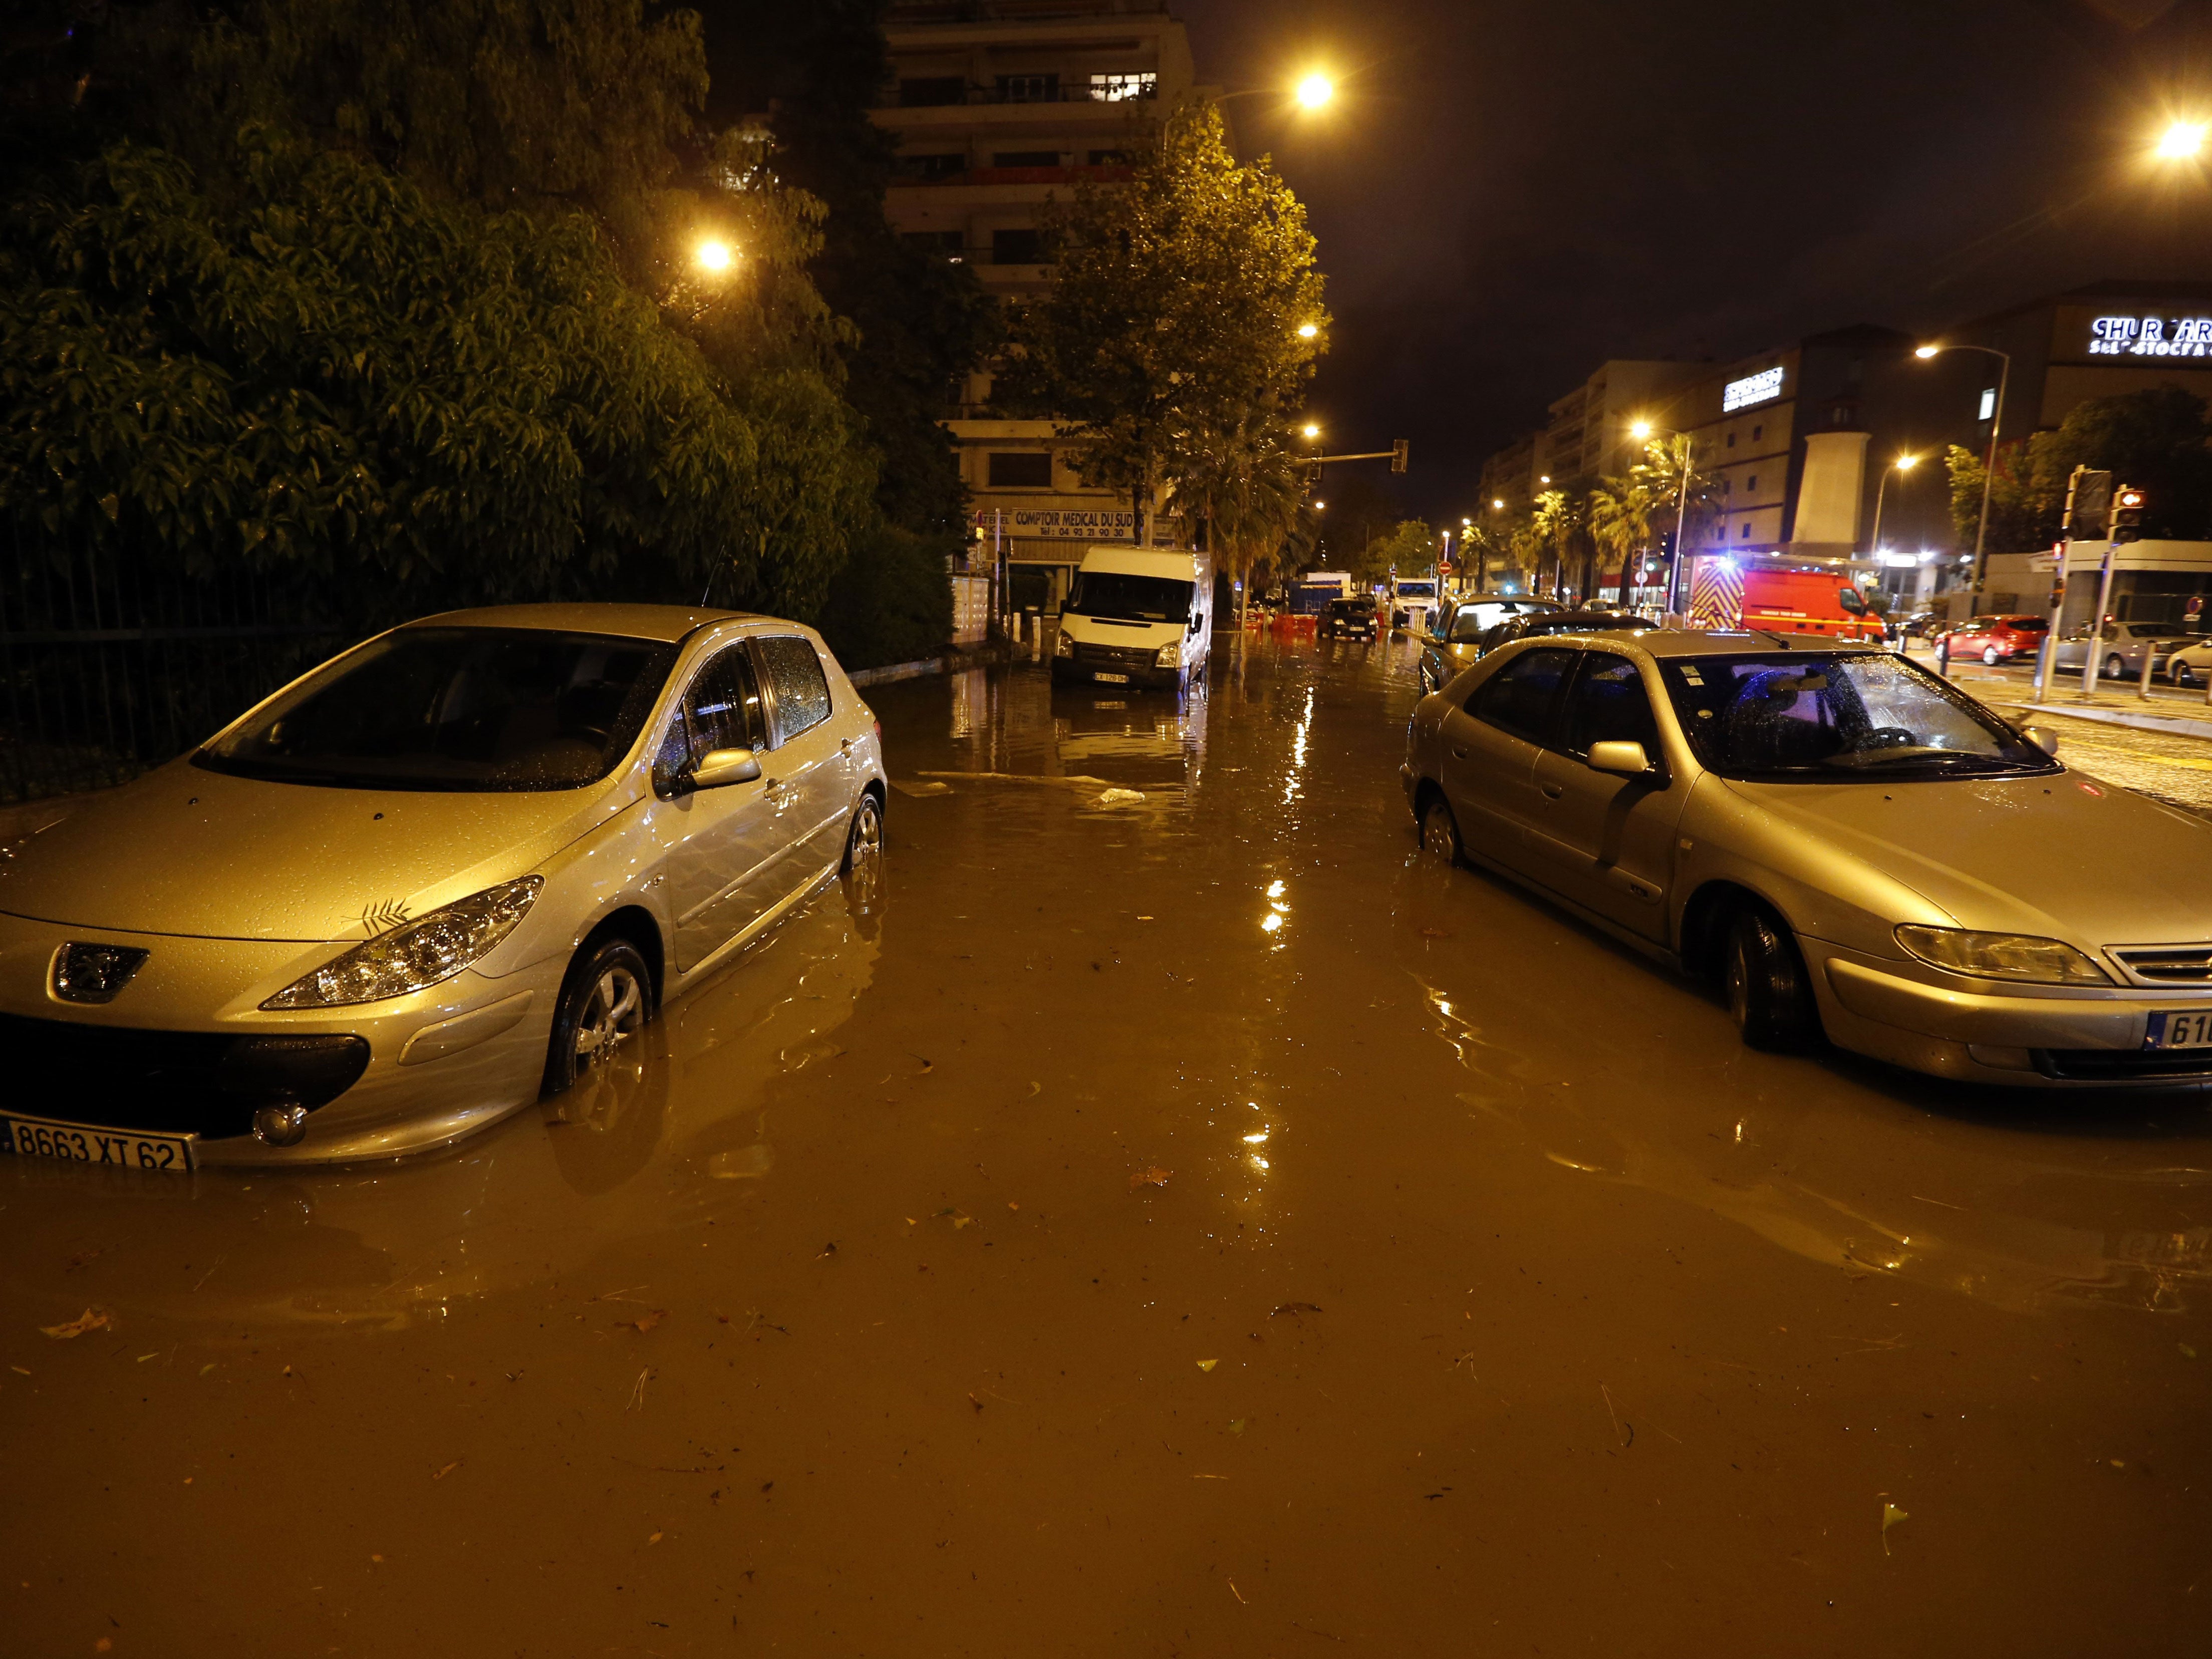 Torrential rain caused flooding in towns along the French Riviera, including Nice and Cannes